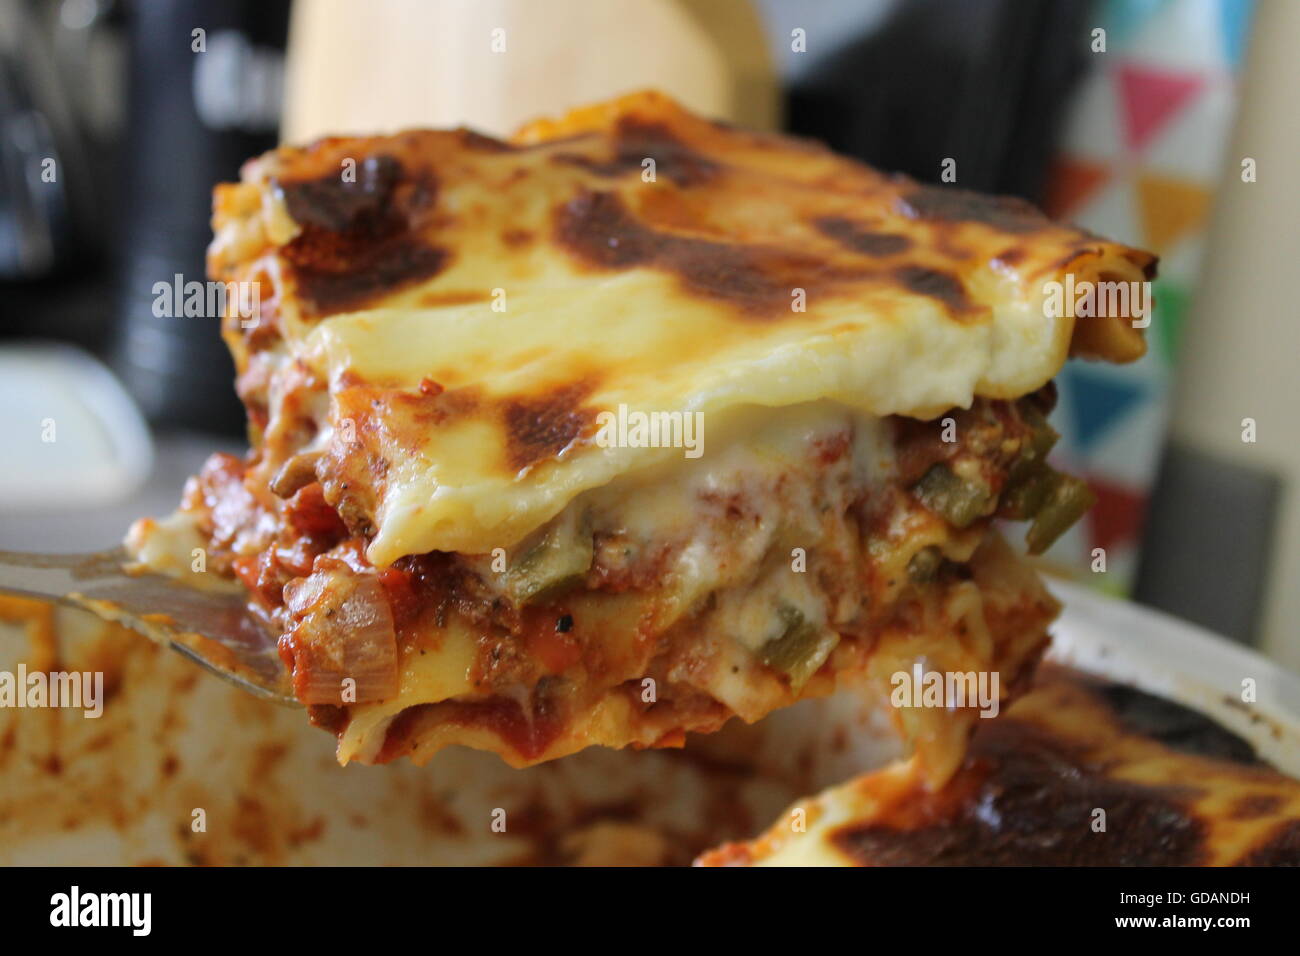 Homemade lasagne, home cooking, homemade cheese sauce, bolognese sauce, mince, onions, peppers, garlic, Italian food Stock Photo